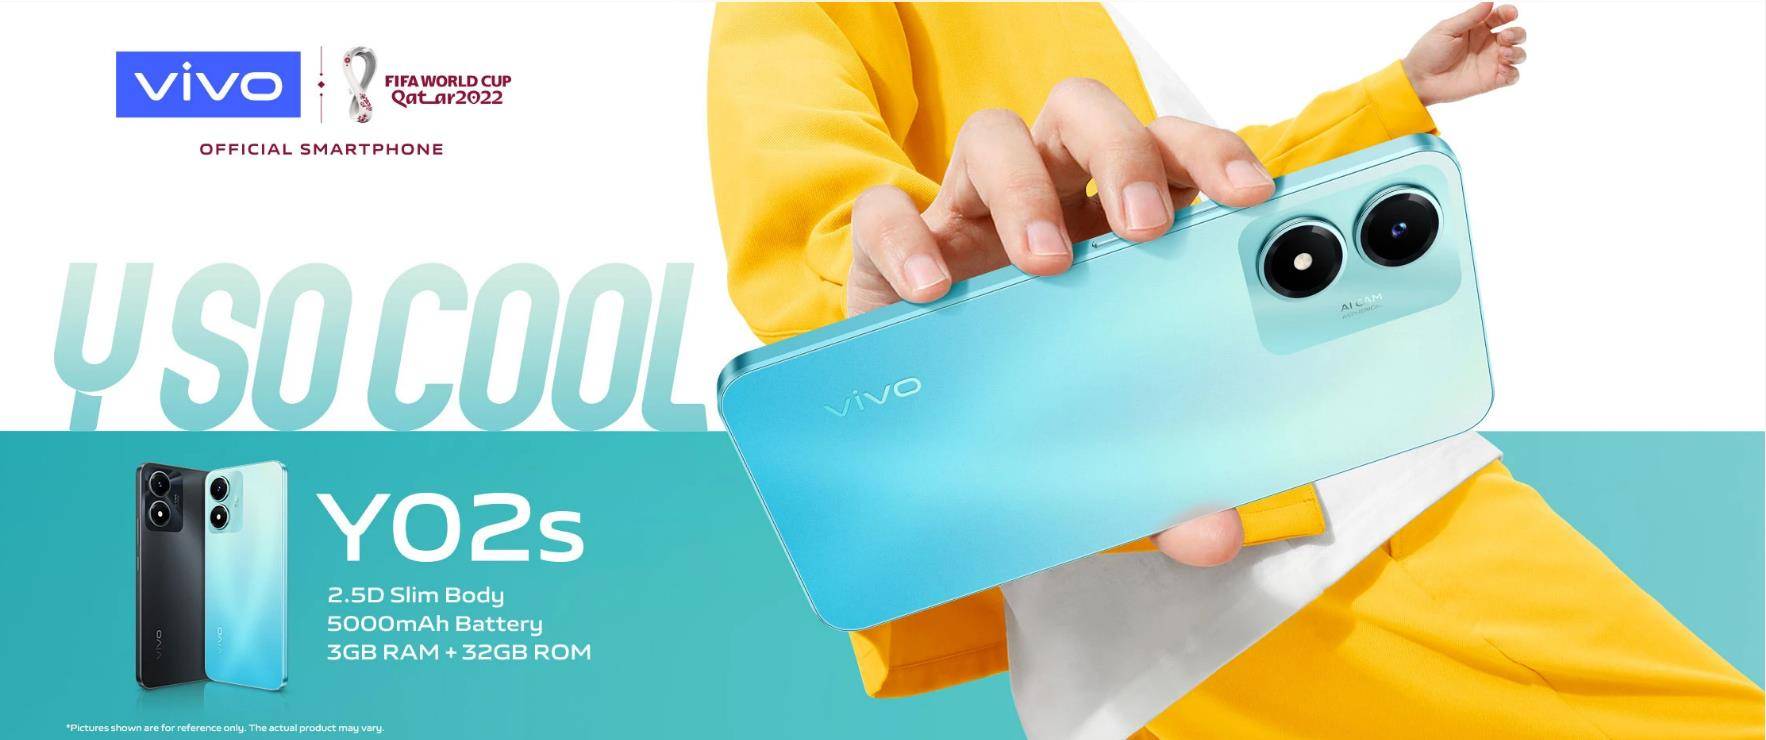 vivo’s Latest Y02s Launched in Pakistan with 5000mAh Battery and Trendy Design